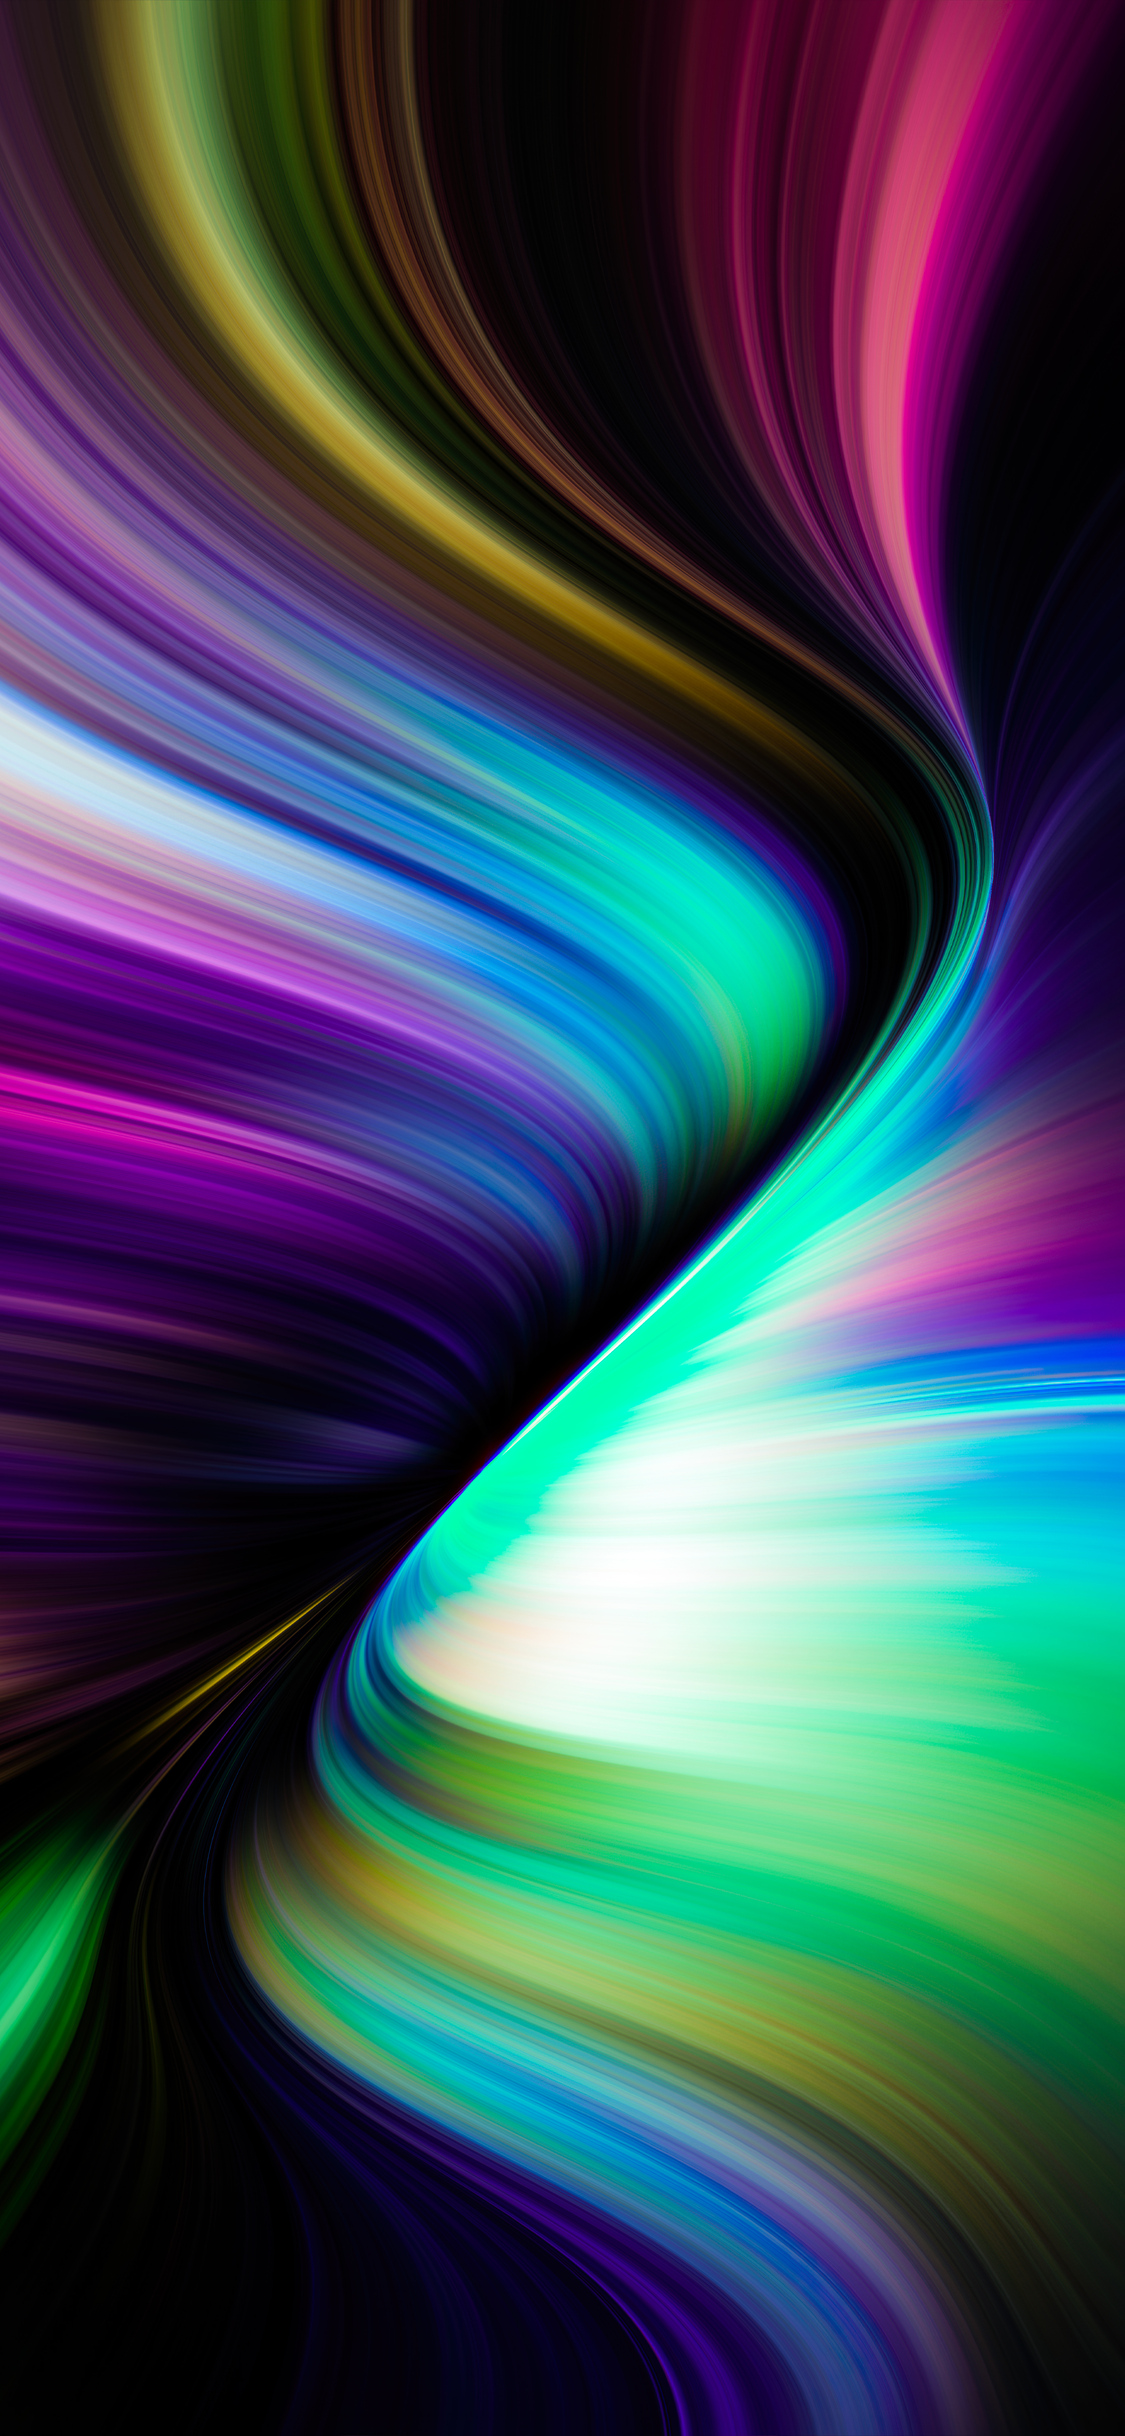 1125x2436 Joining Another Abstract 4k Iphone XS,Iphone 10,Iphone X HD